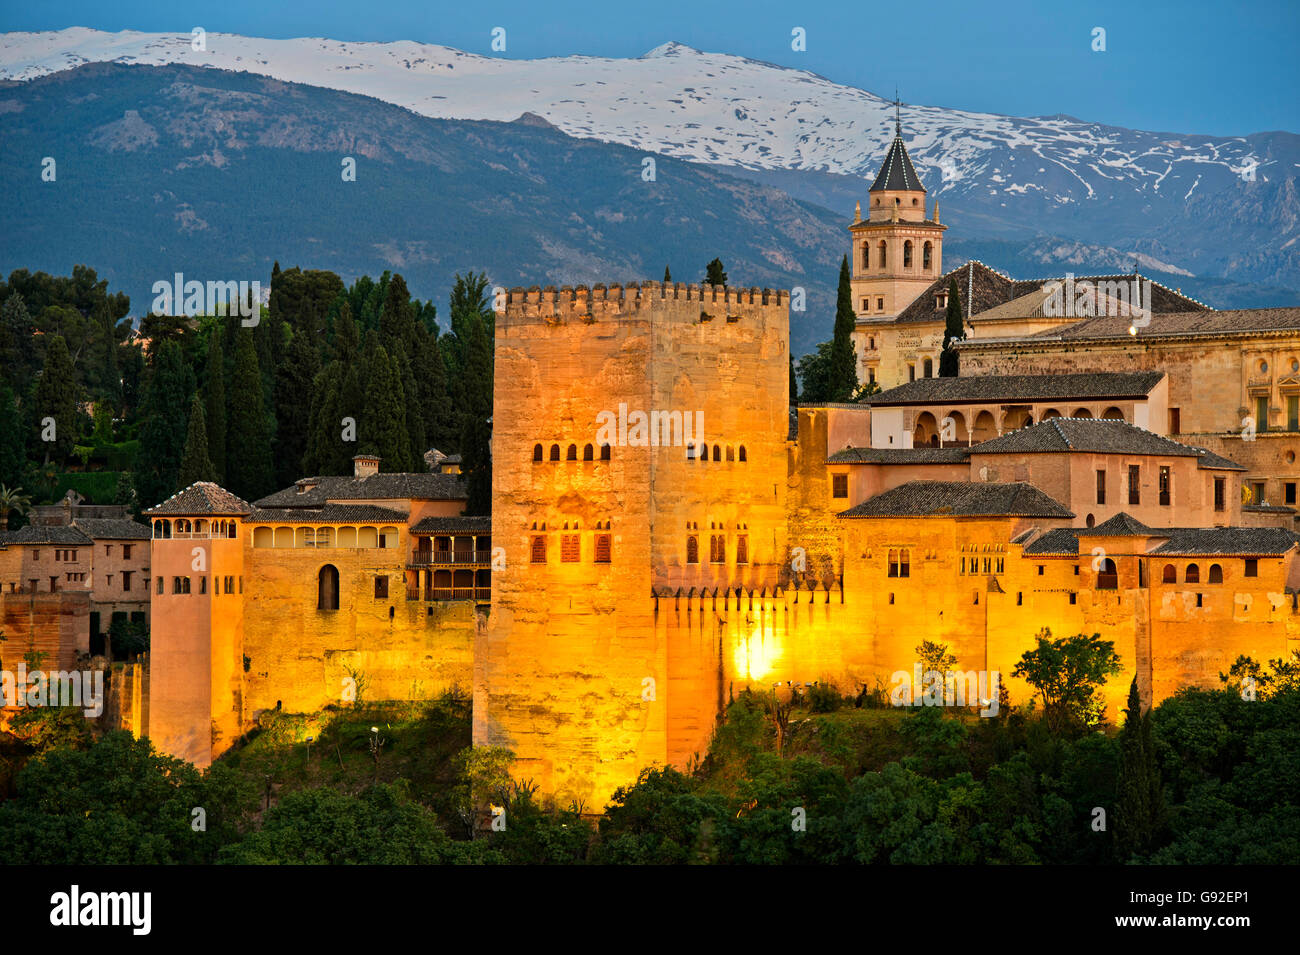 Evening light at the Alhambra, UNESCO World Heritage Site, against the Sierra Nevada mountain range, Granada, Andalusia, Spain Stock Photo